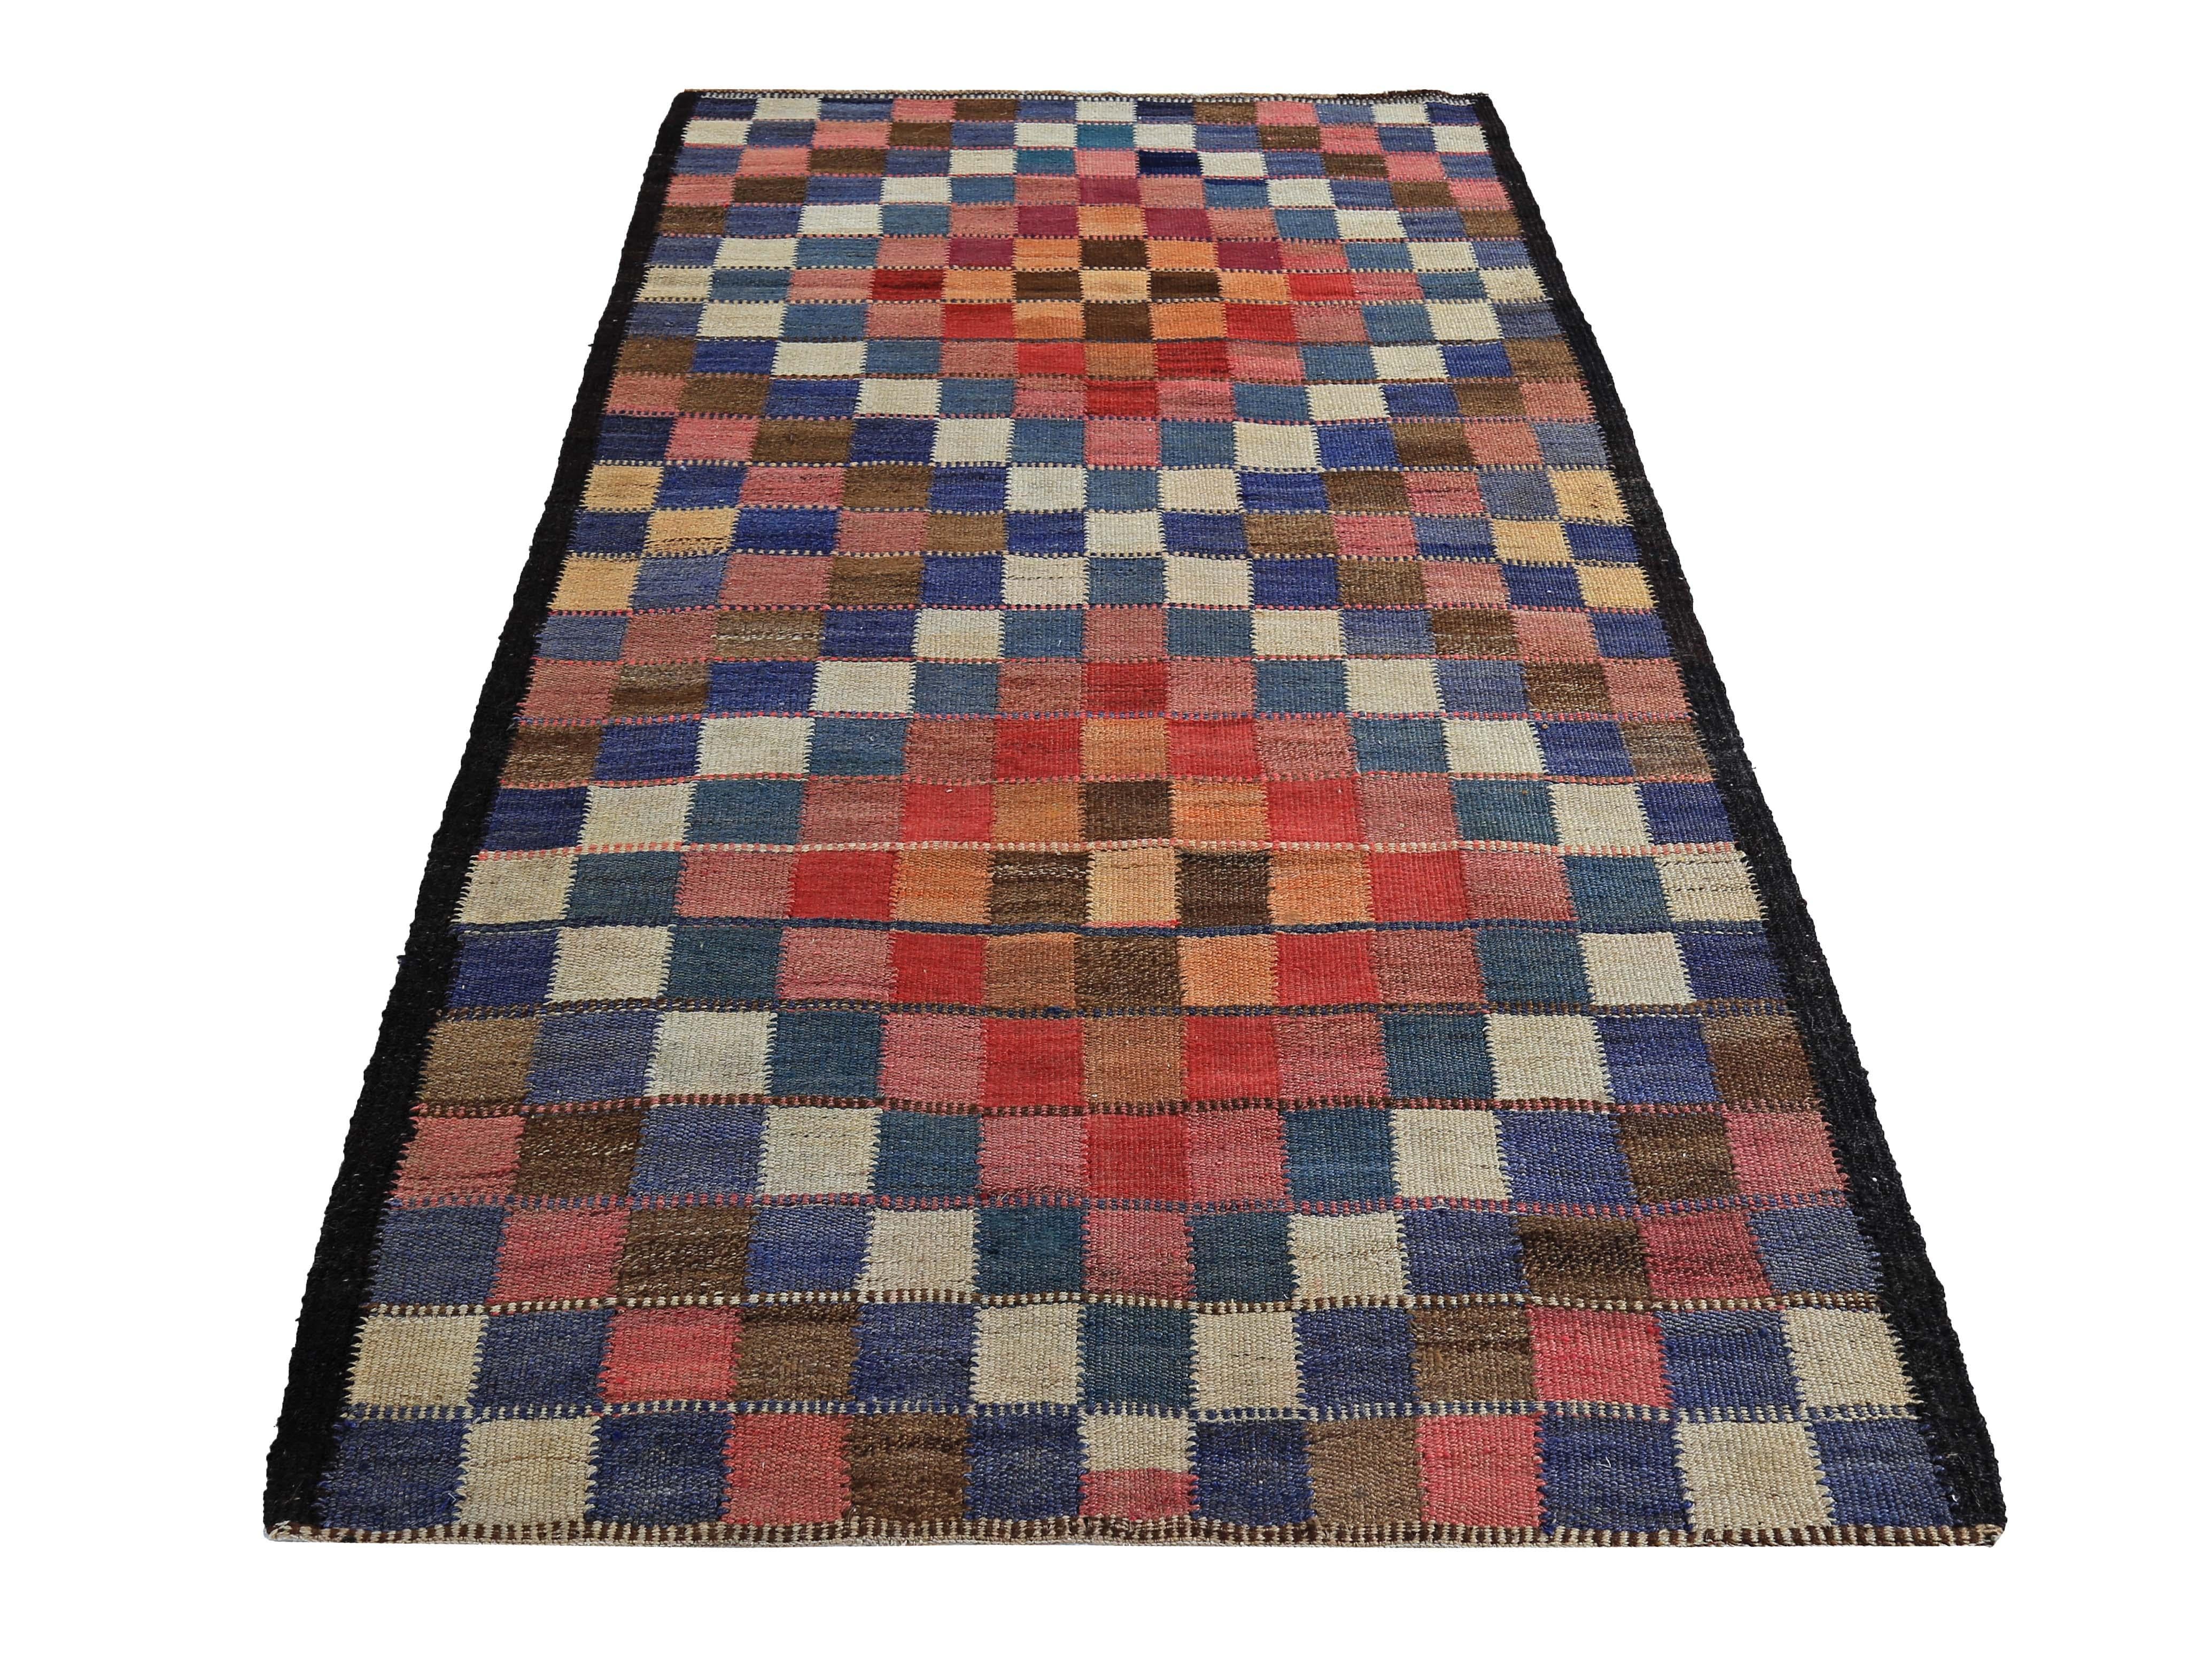 Turkish rug handwoven from the finest sheep’s wool and colored with all-natural vegetable dyes that are safe for humans and pets. It’s a traditional Kilim flat-weave design featuring red, pink and blue checkered design. It’s a stunning piece to get